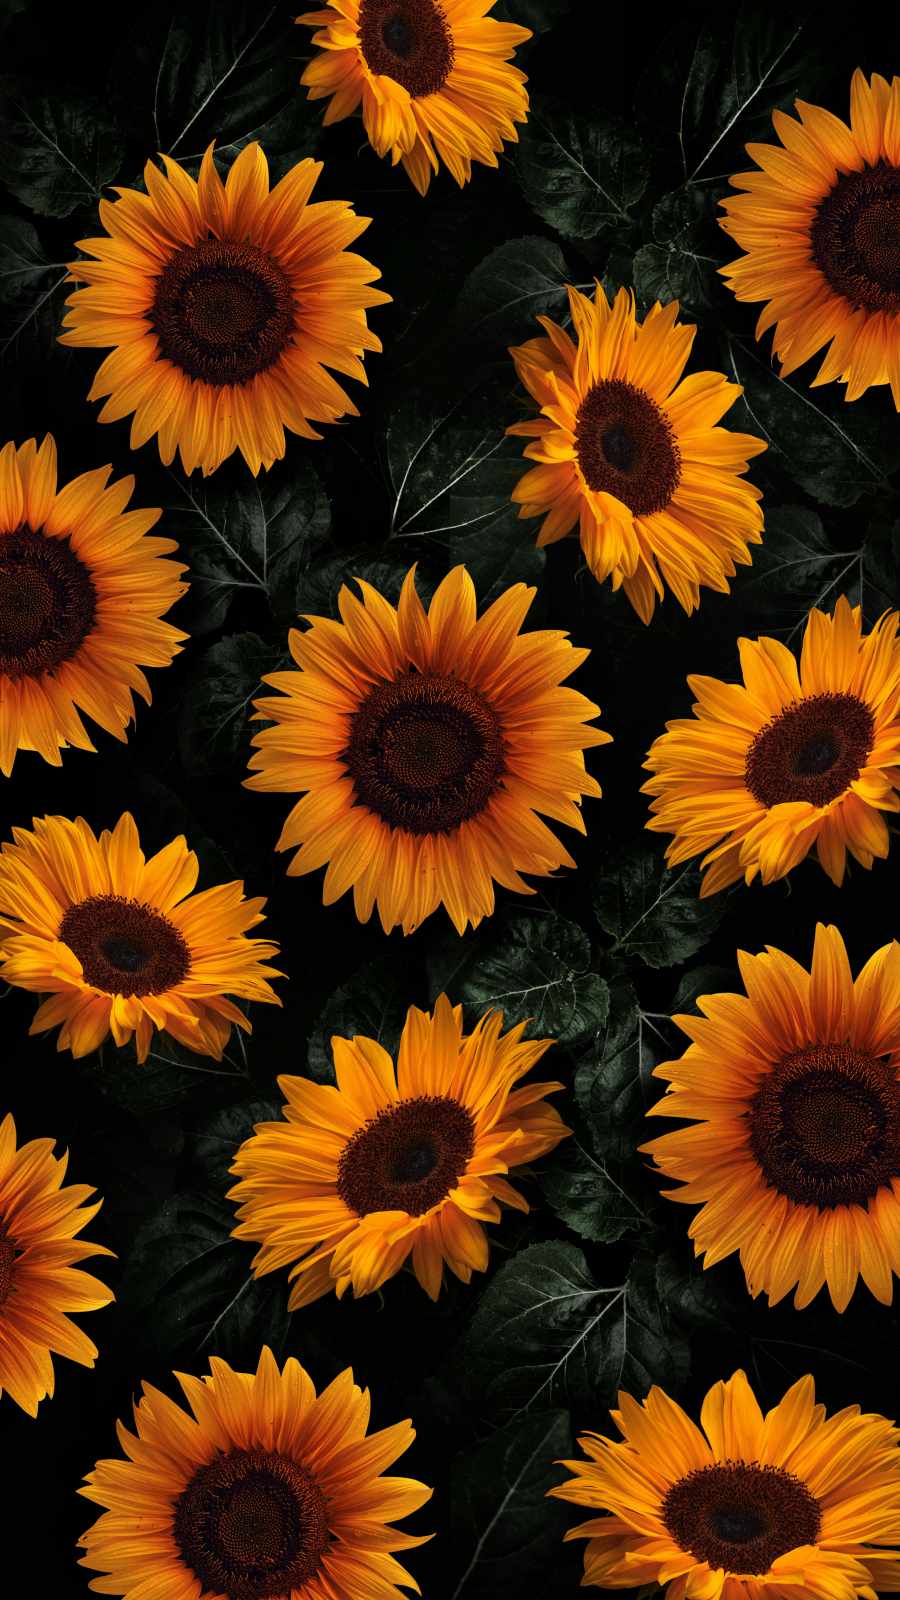 Sunflowers 4K IPhone Wallpaper - IPhone Wallpapers : iPhone Wallpapers